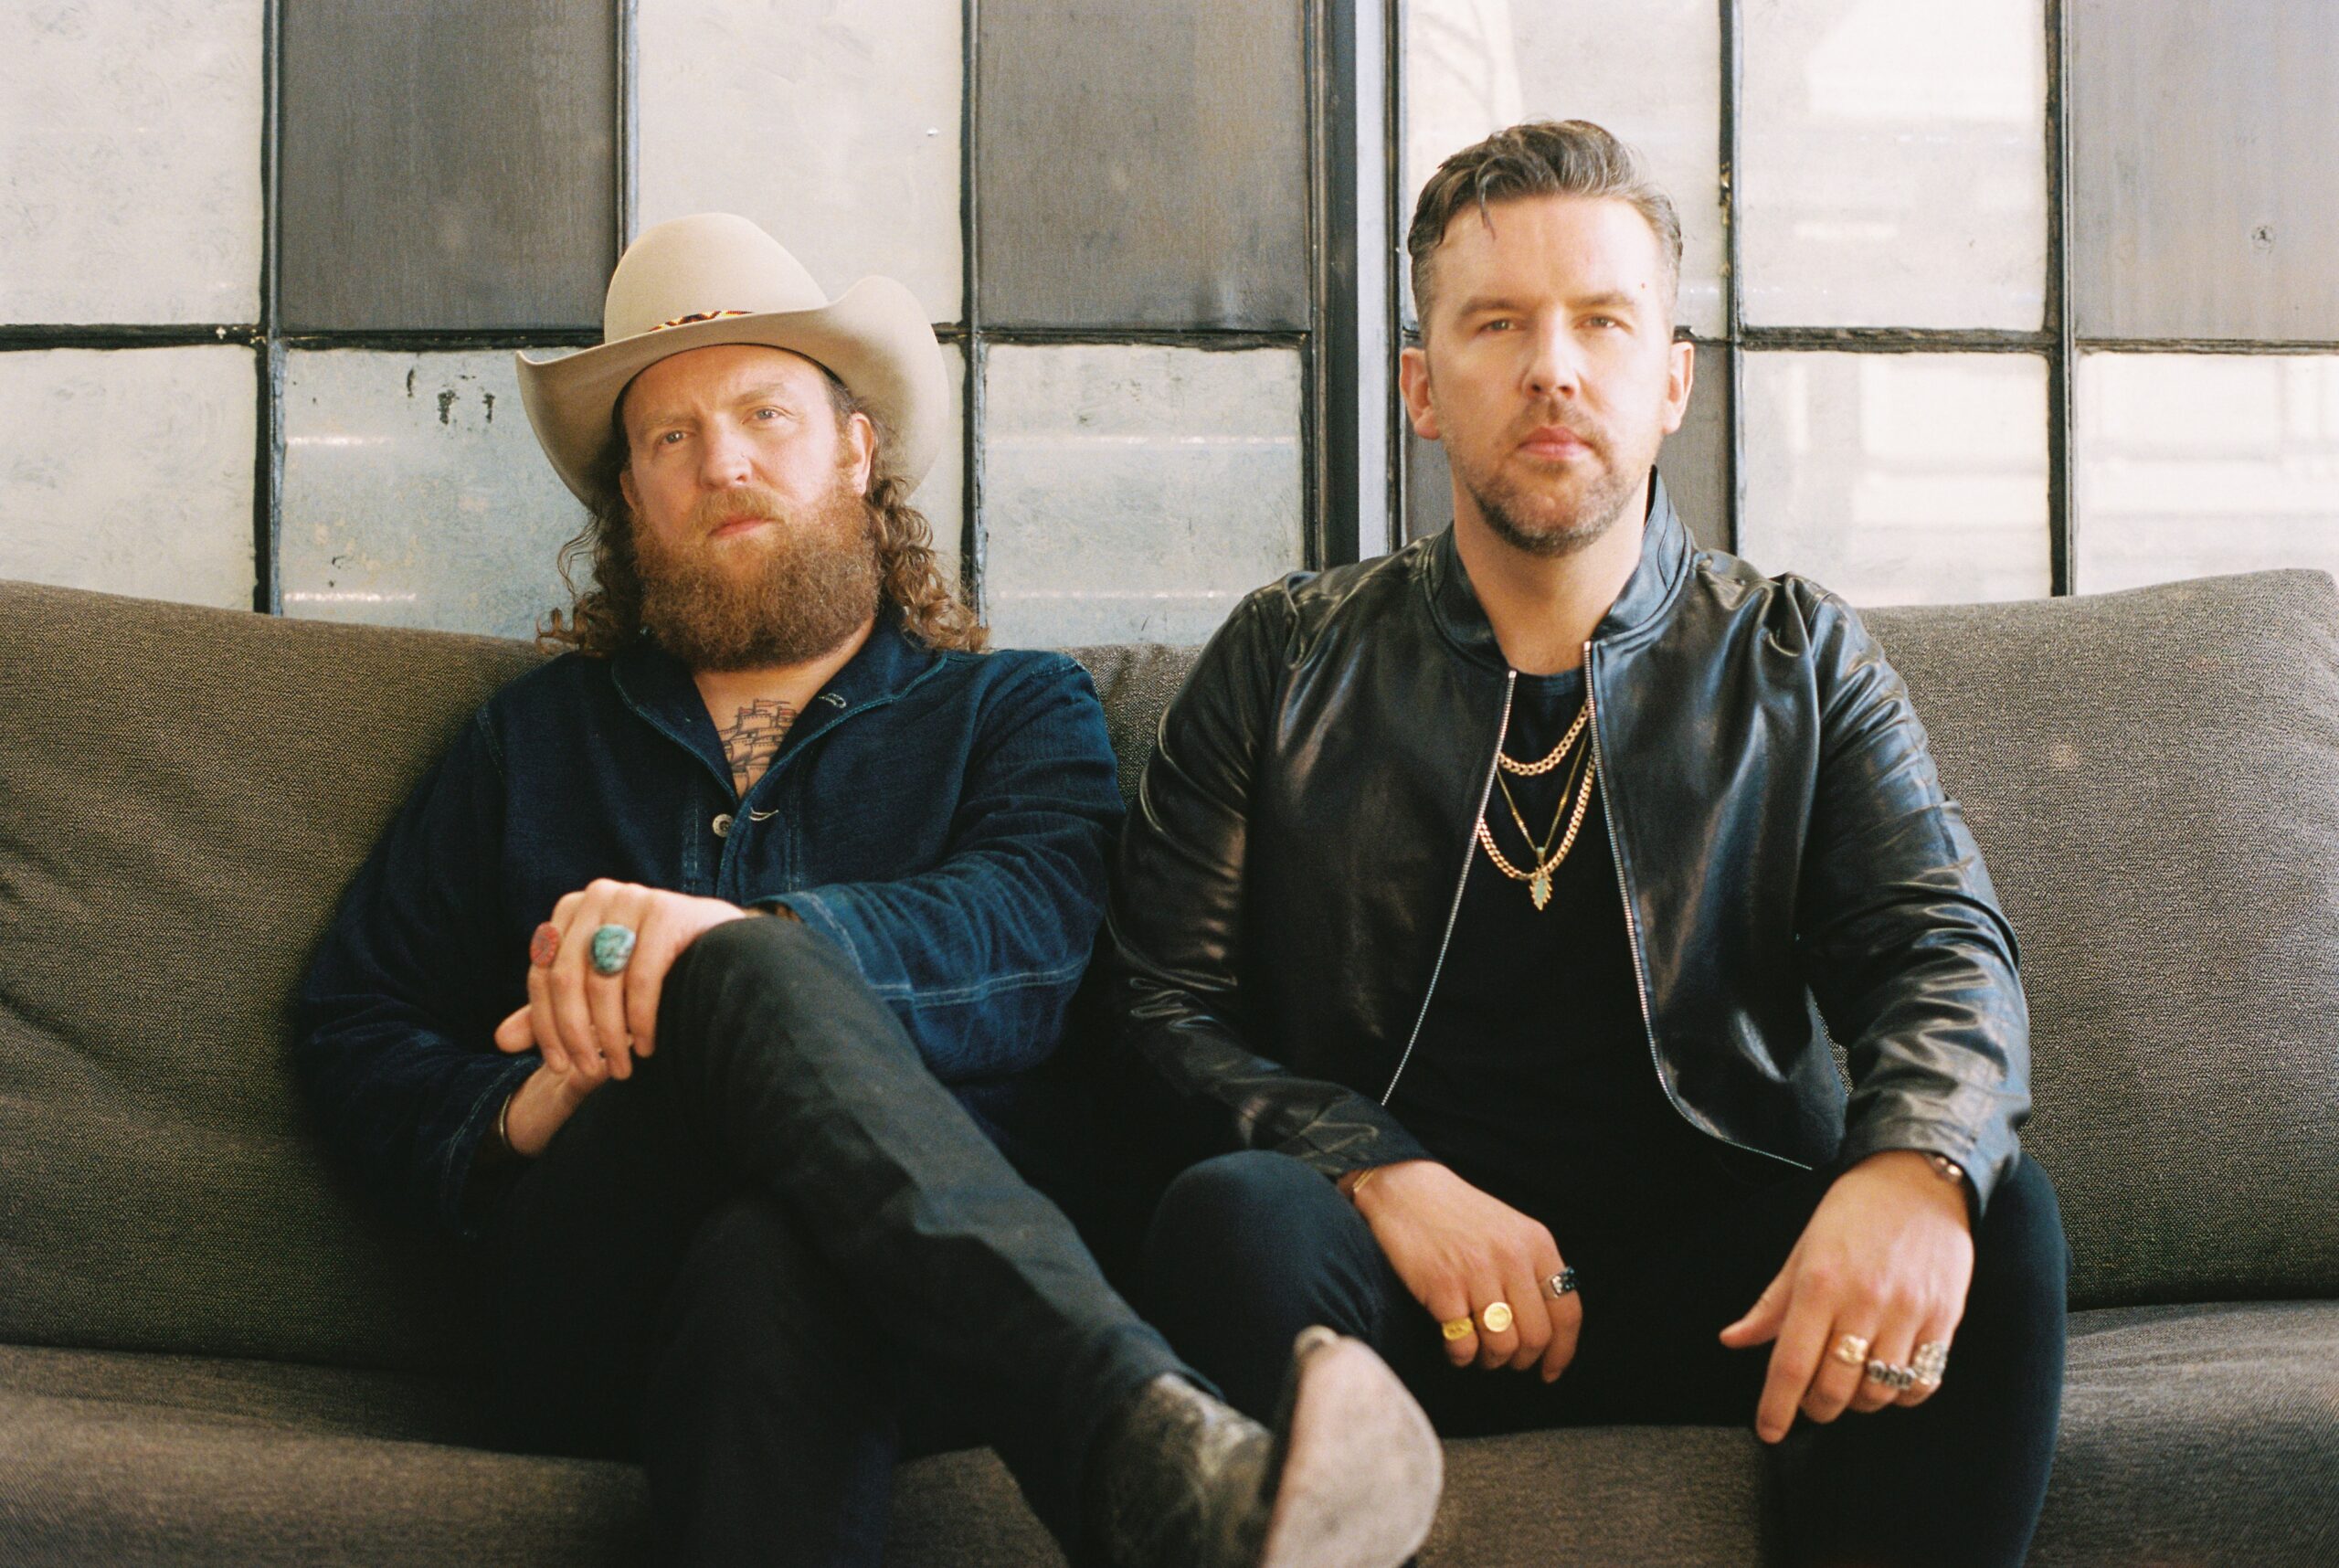 New Music Friday: Brothers Osborne Release Three New Tracks Under a Project Titled “Nobody’s Nobody Sampler”